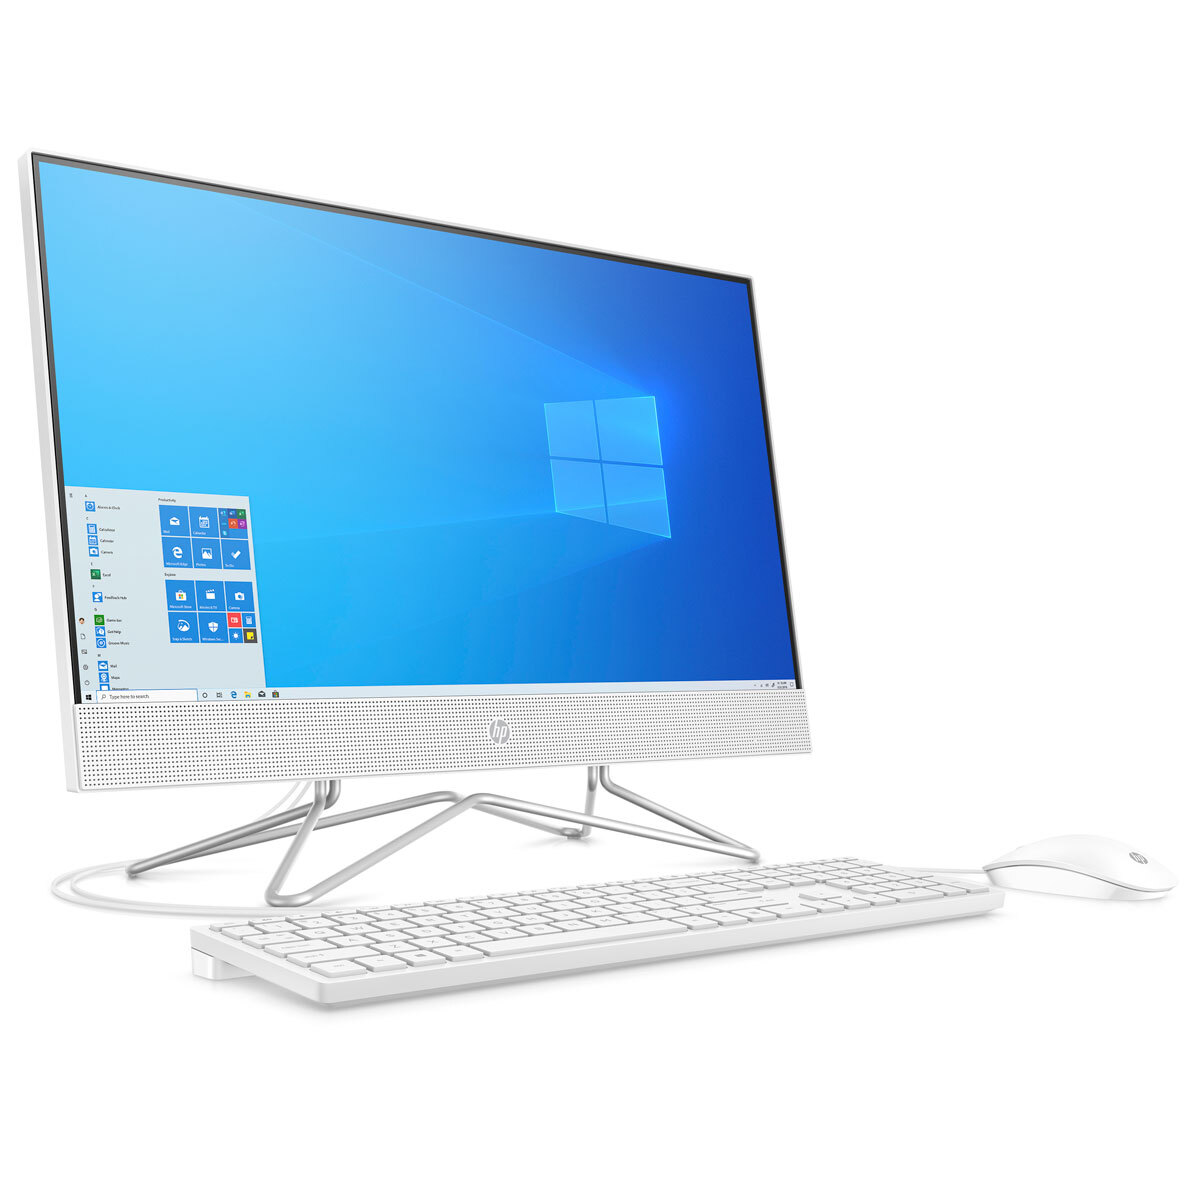 Buy HP, Intel Core i5, 8GB RAM, 256GB SSD, 24 Inch, All in One Desktop PC, 24df0026na at costco.co.ukimages